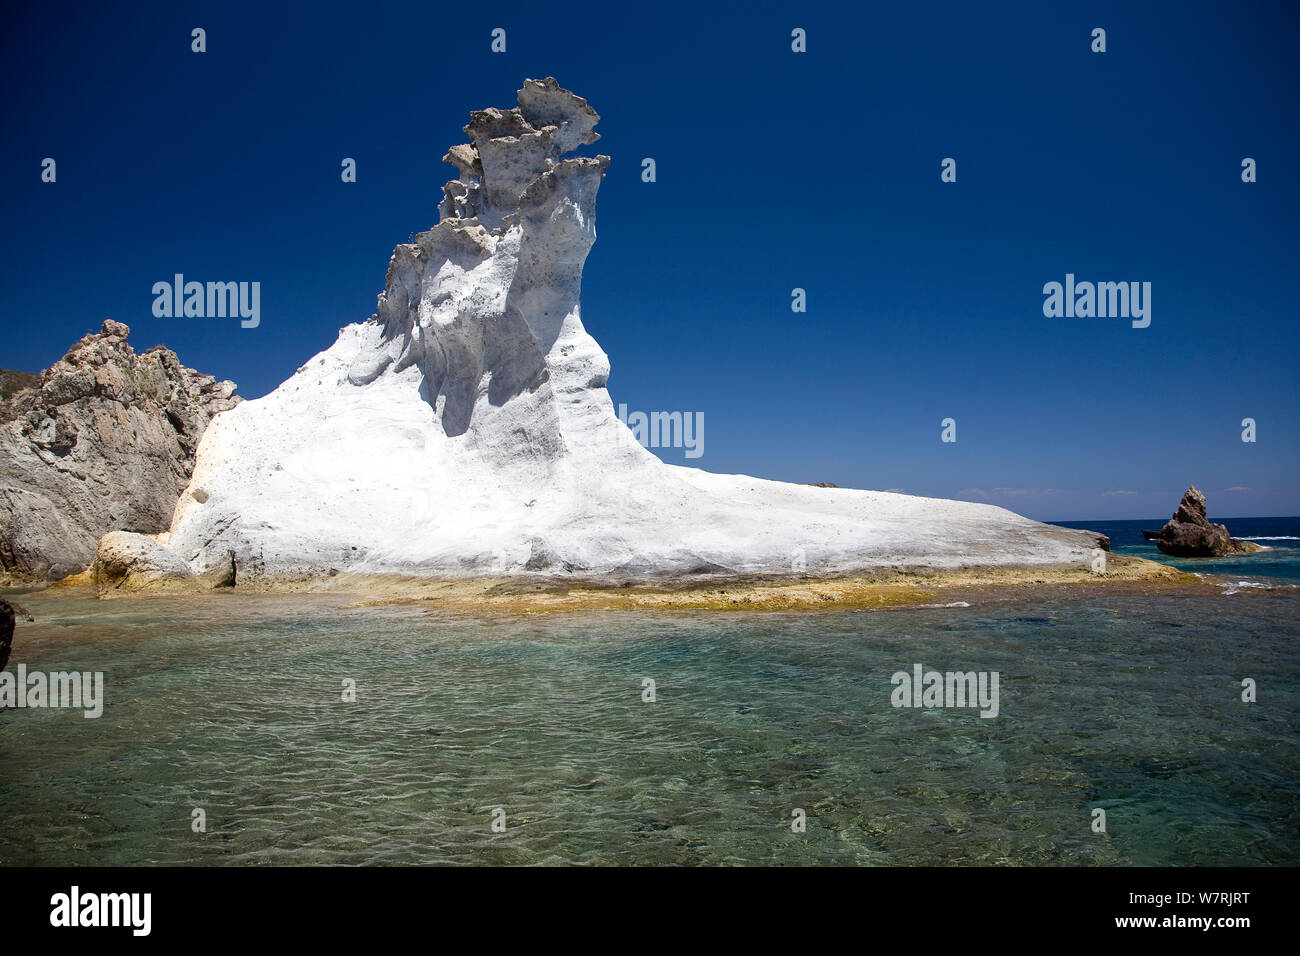 The 'Piana Bianca' a Rock formation at the entry of the bay, right of the harbour, Ponza Island, Italy, Tyrrhenian Sea, Mediterranean, July 2008 Stock Photo